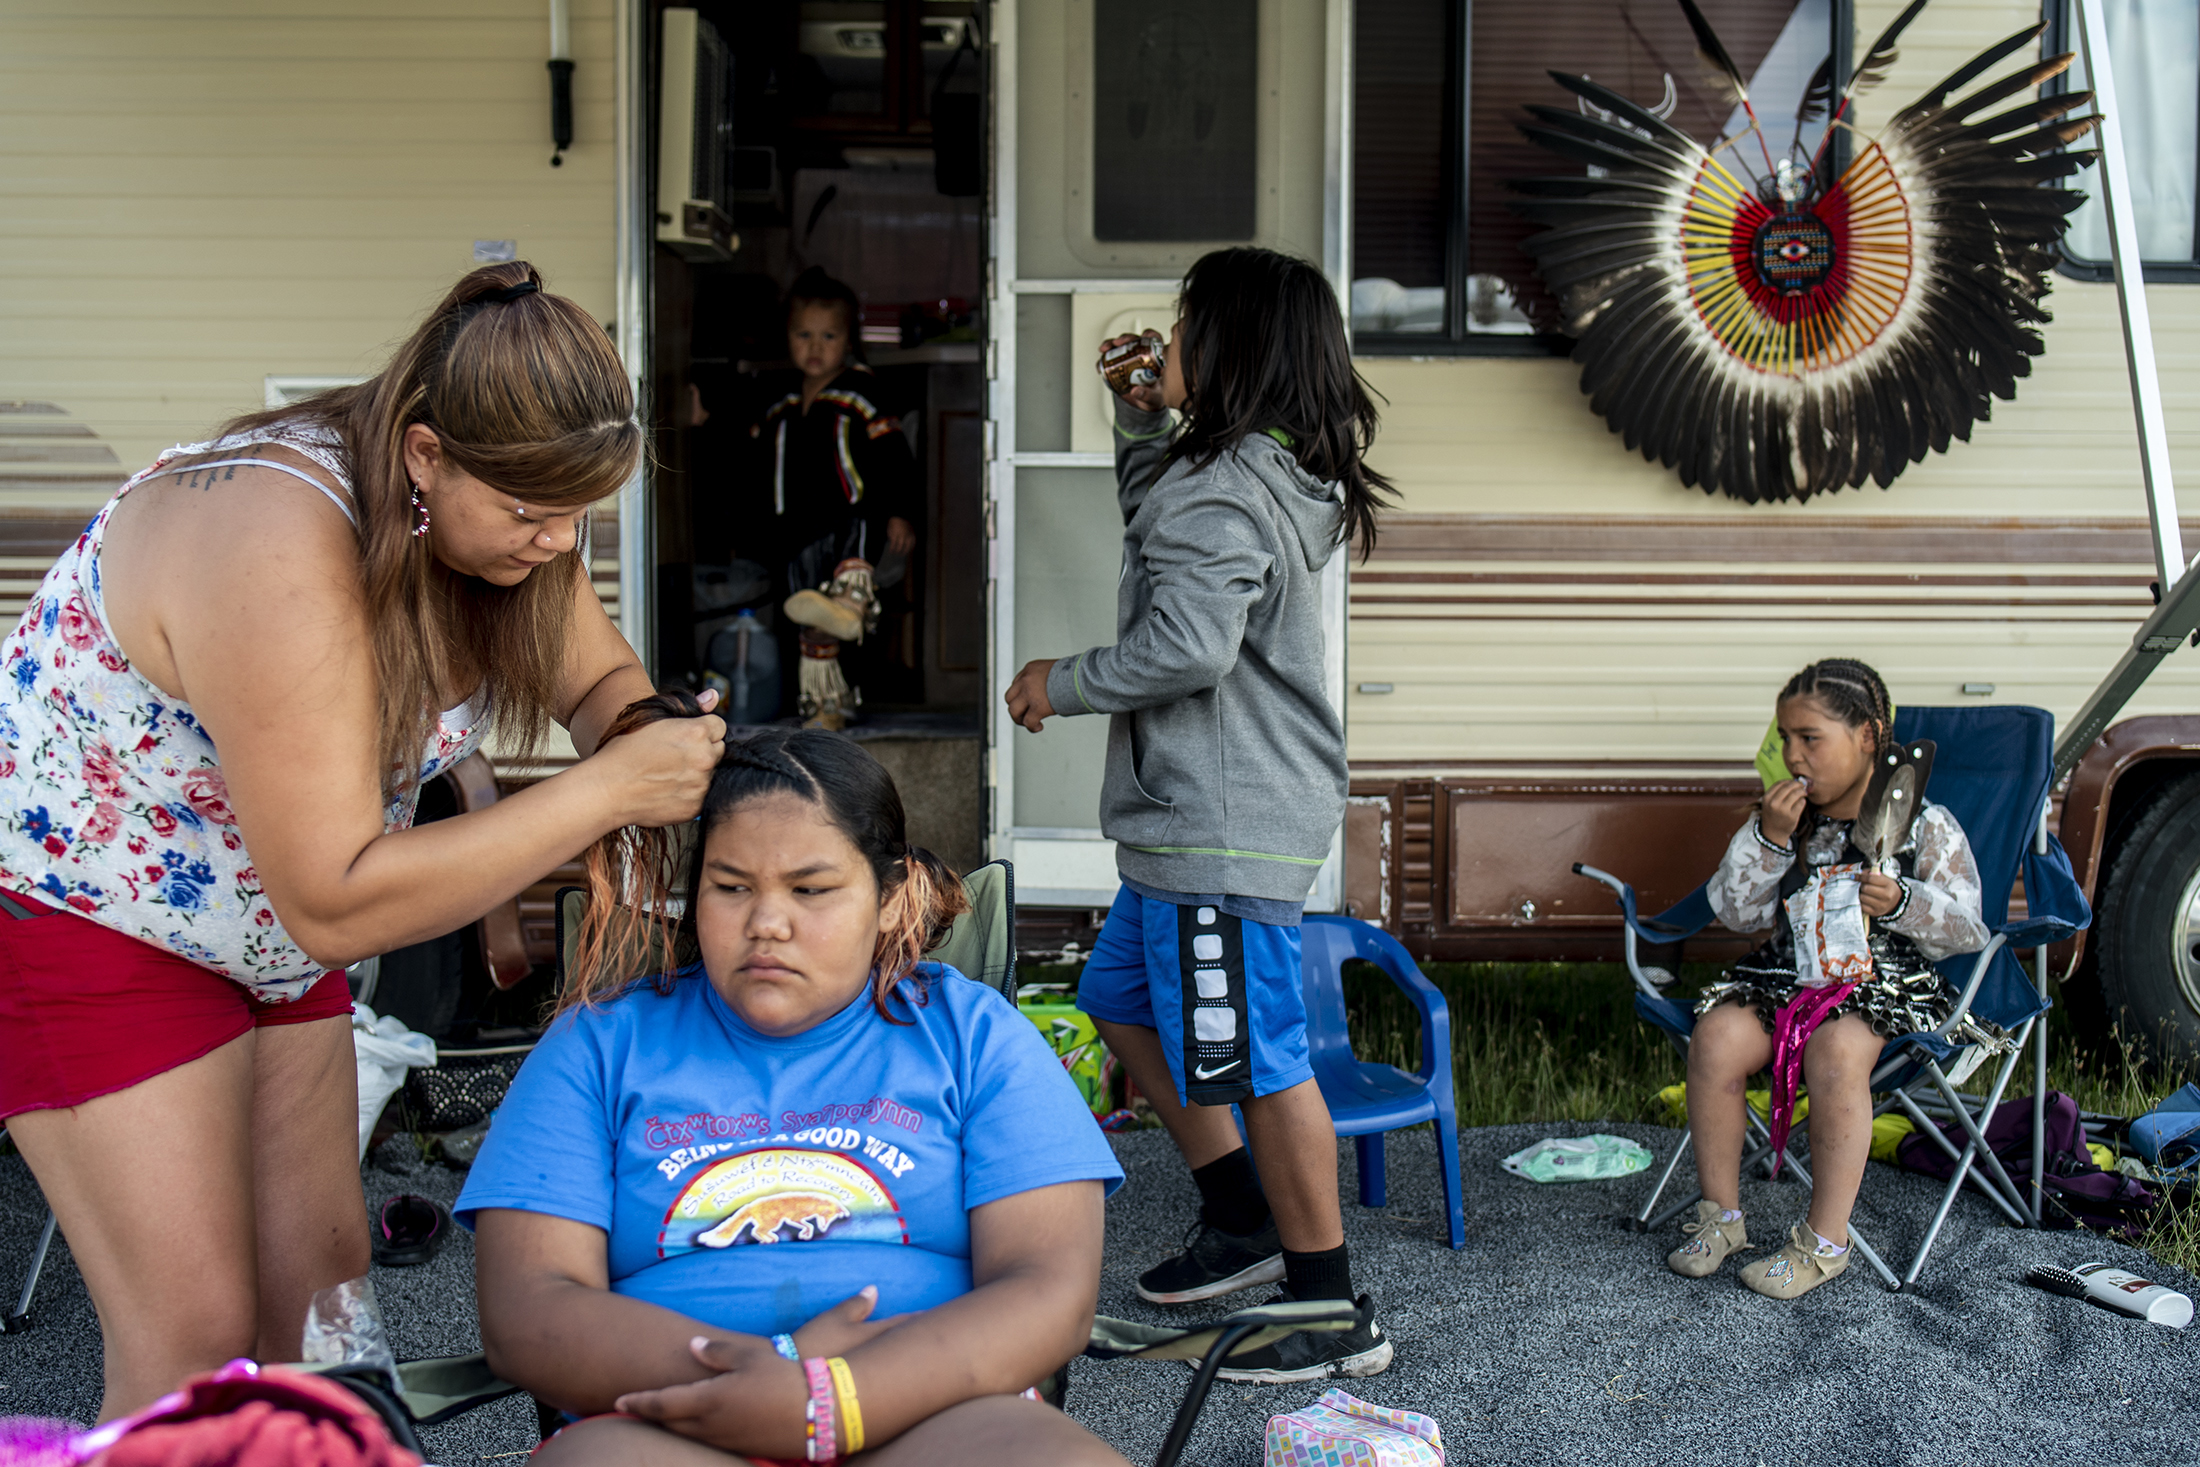  Patricia Hendrickx, left, helps Jessi James, middle, with her hair before the performance of the Snake Dance during the Arlee Celebration, Thursday, July 4, 2019 in Arlee, Montana. 